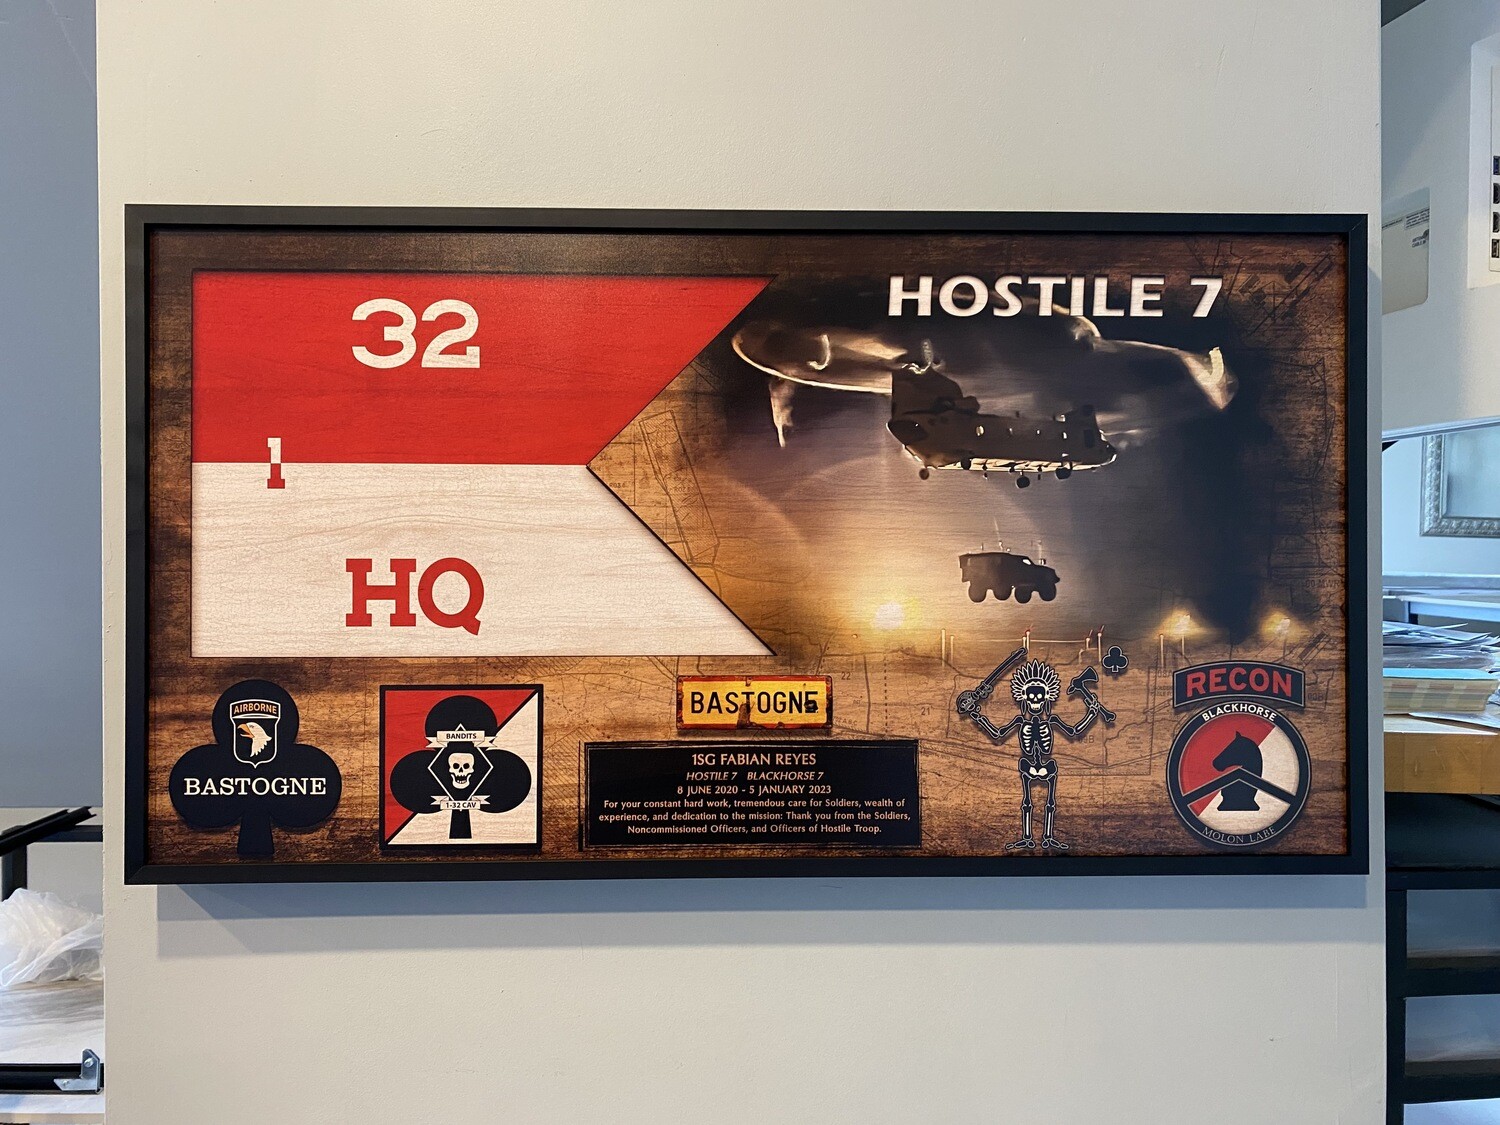 HHT "Hostile" 1-32 CAV Guidon and Photo Wood Plaque - 28.25"x15.25"